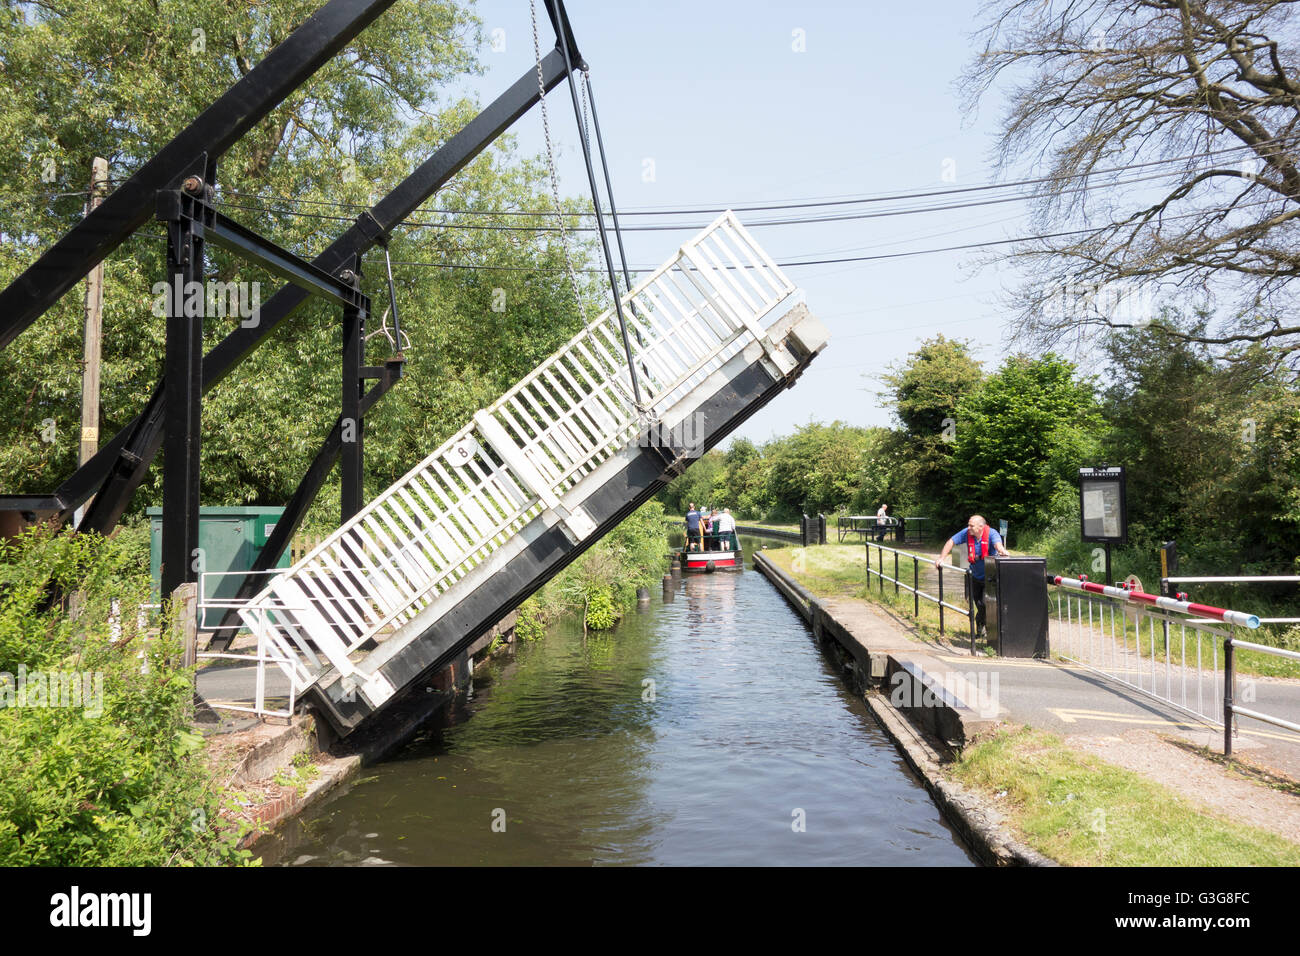 Shirley swing Bridge, which is commonly called a lift bridge, on the North Stratford Canal Stock Photo